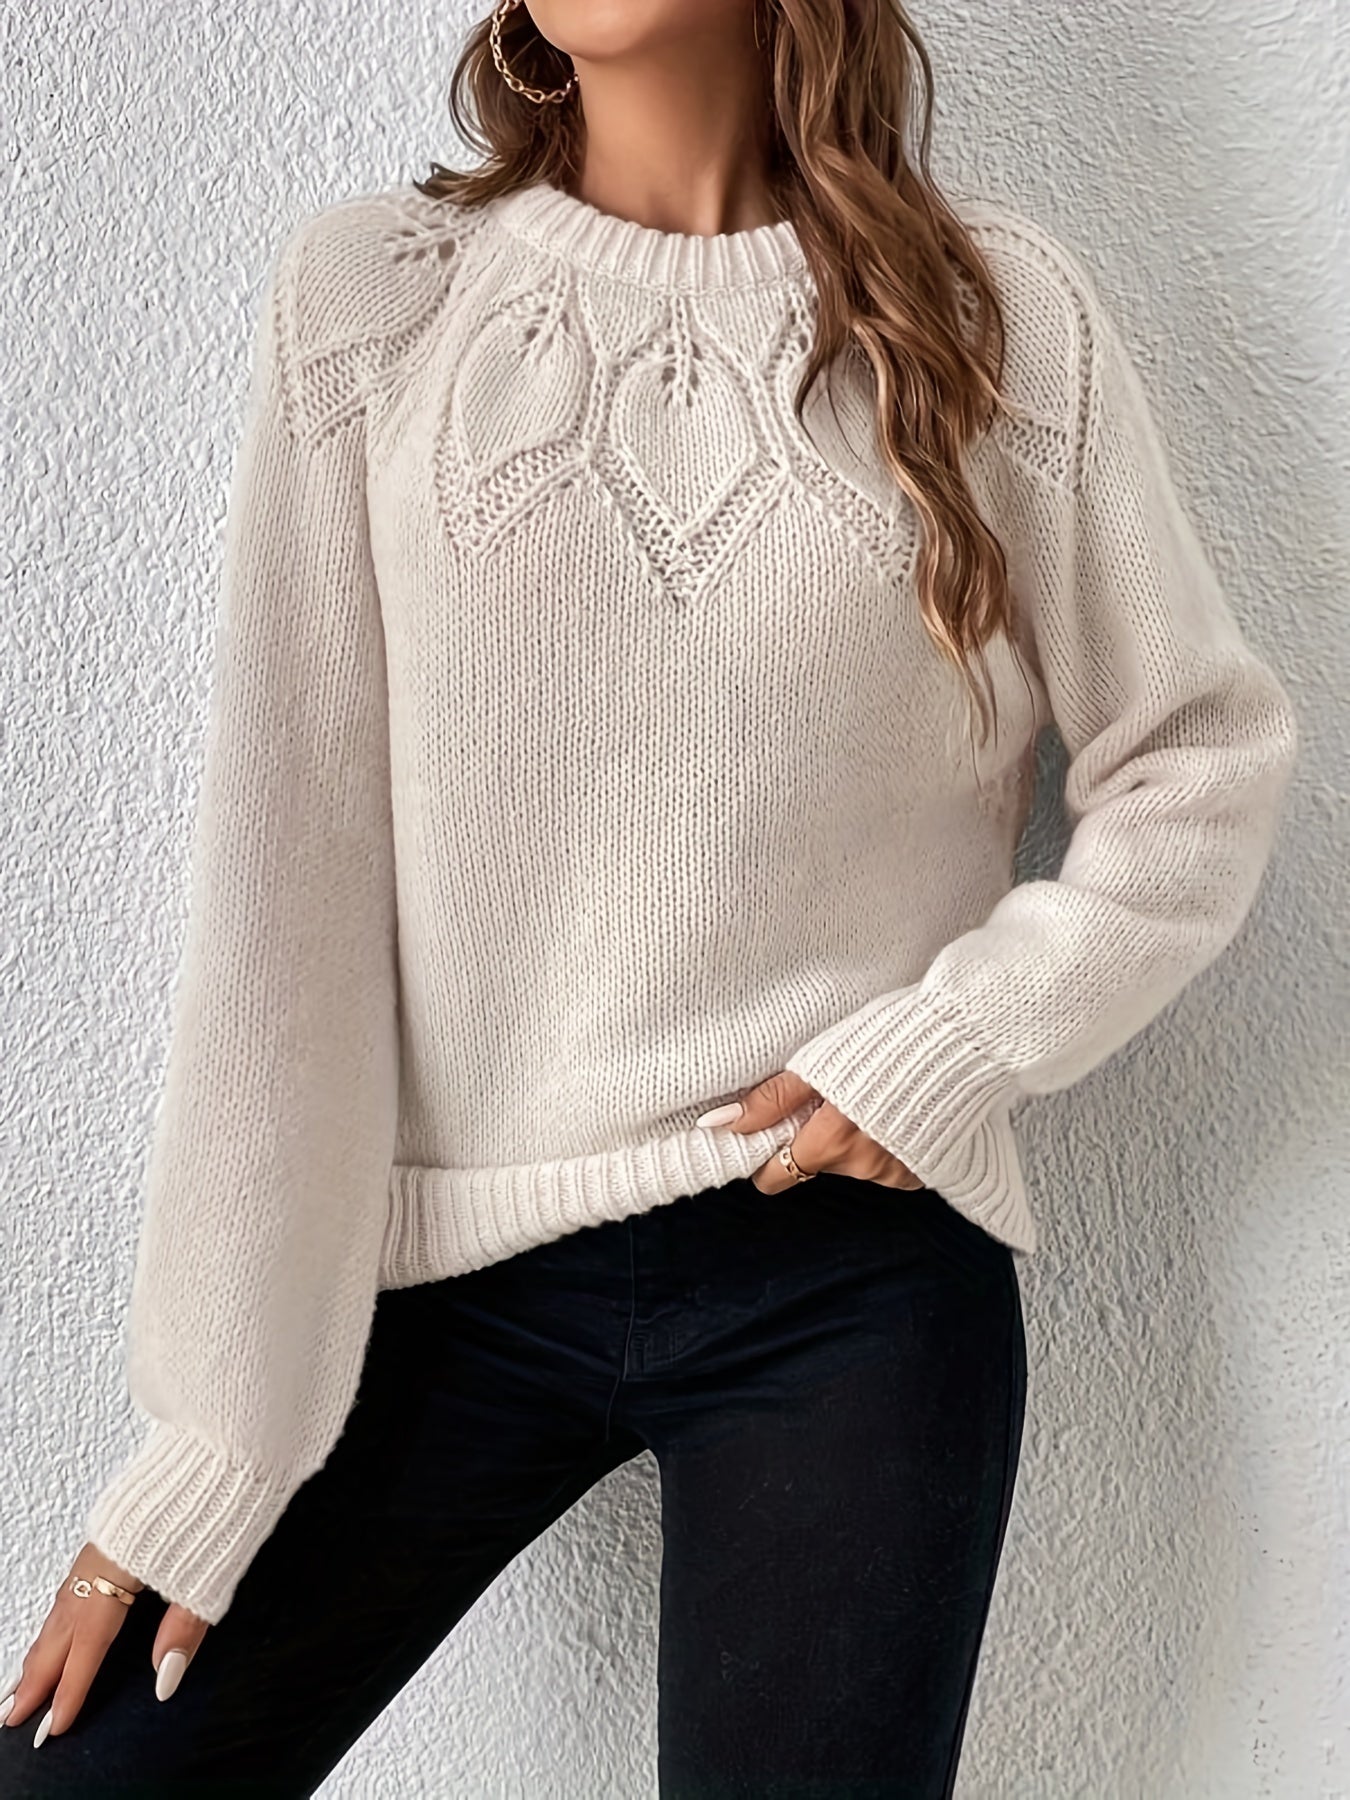 Antmvs Solid Versatile Knit Sweater, Casual Crew Neck Long Sleeve Sweater, Women's Clothing